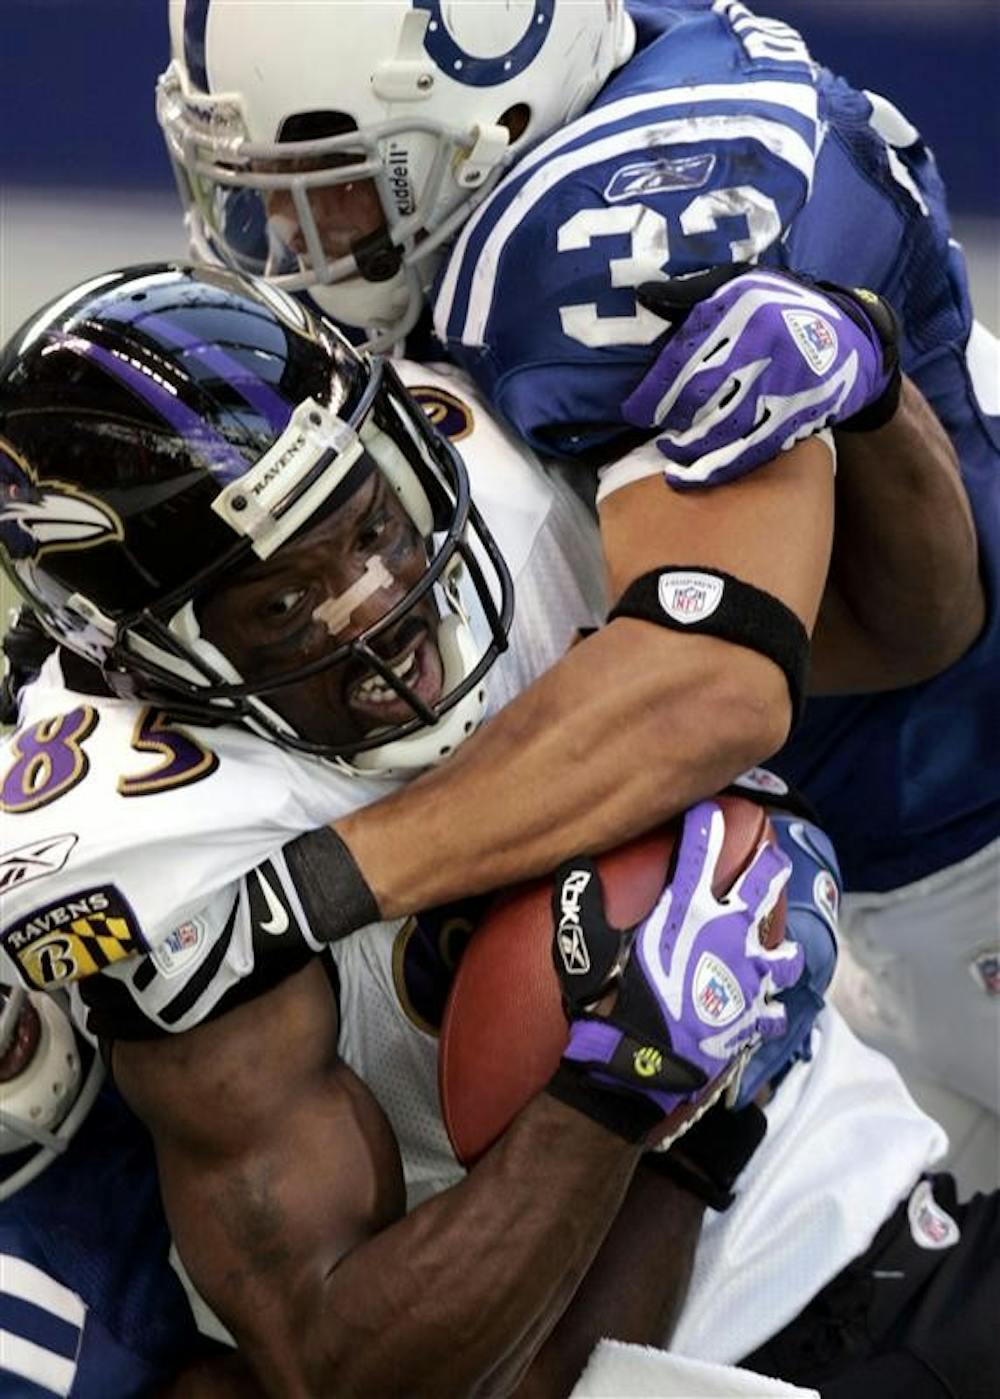 Baltimore Ravens wide receiver Derrick Mason (85) is tackled after a reception, by Indianapolis Colts' Melvin Bullitt (33) during the second half of an NFL football game on Sunday in Indianapolis. The Colts won 31-3, marking the team's first regular-season victory at Lucas Oil Stadium.